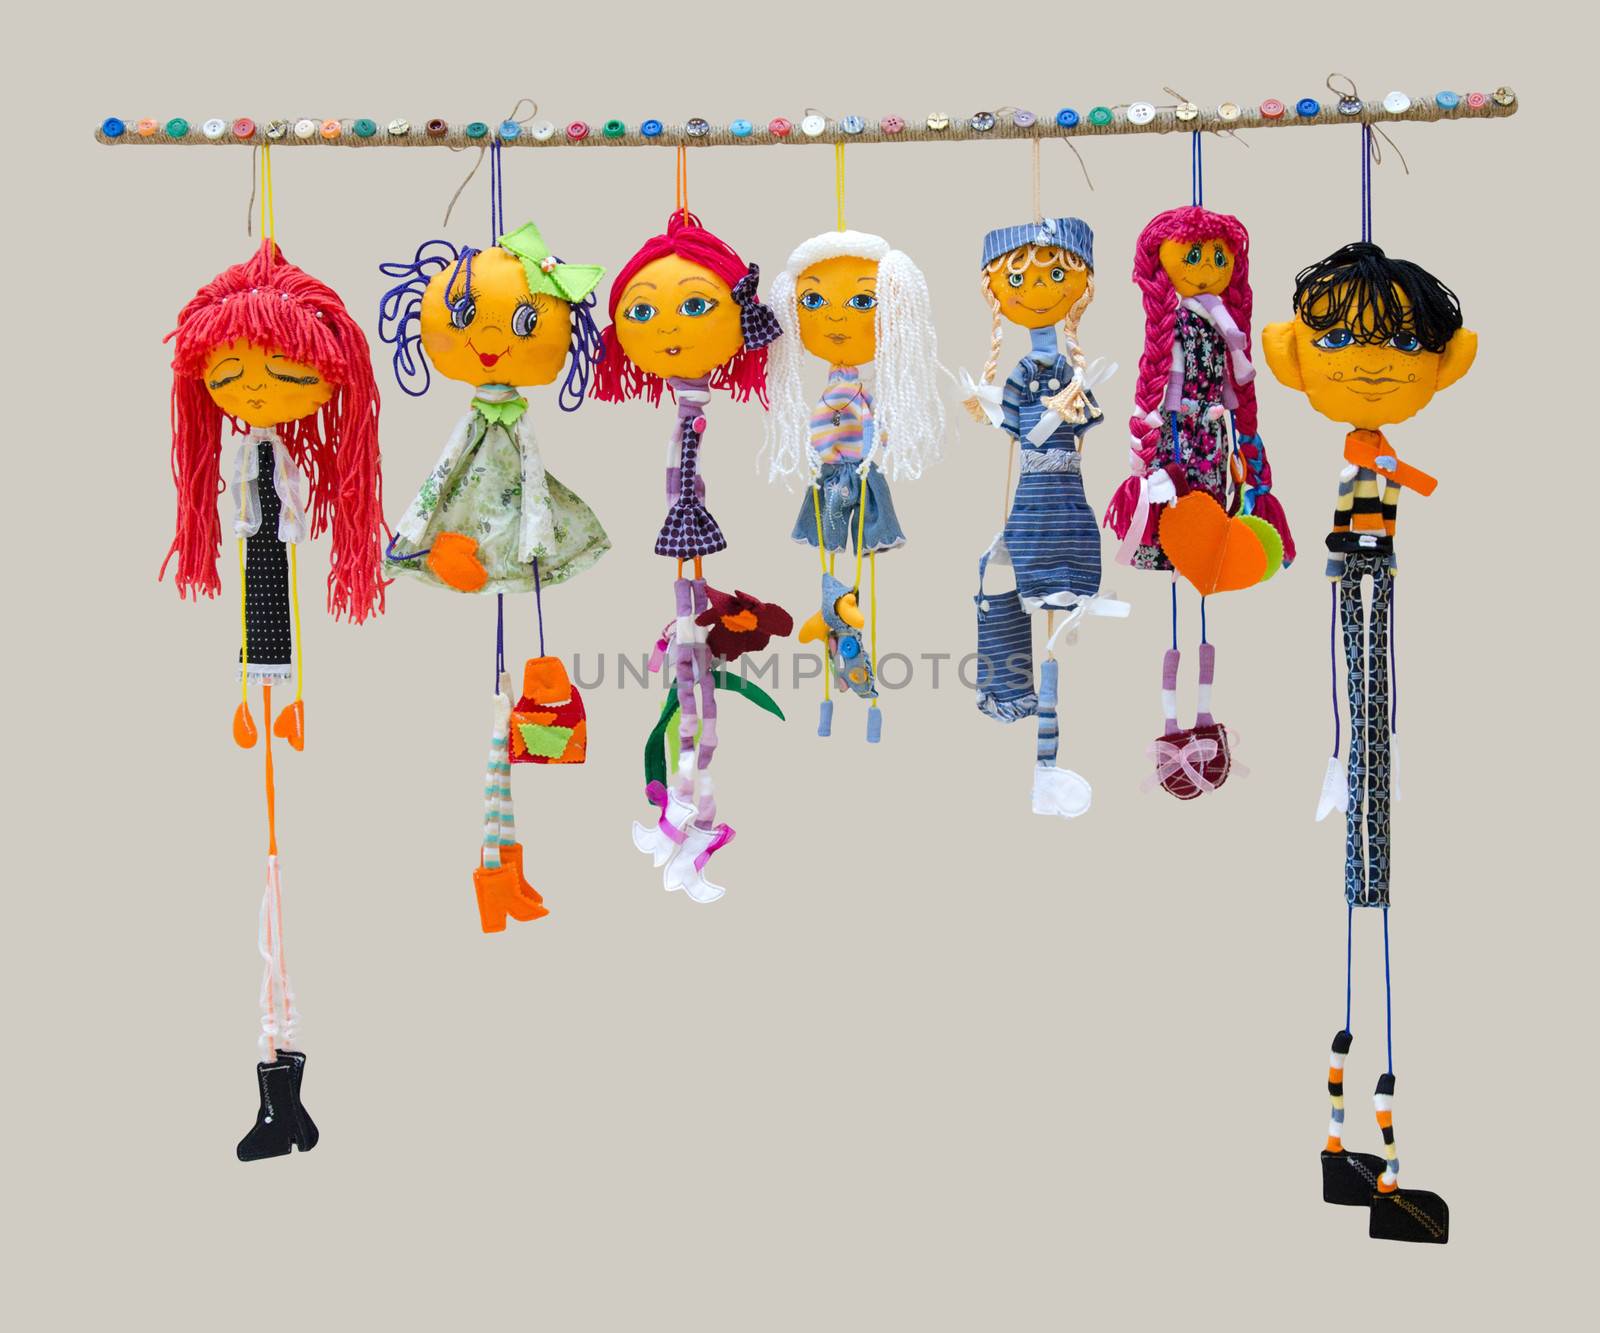 The Six female and one male handmade isolated thin dolls toys in fashionable dresses